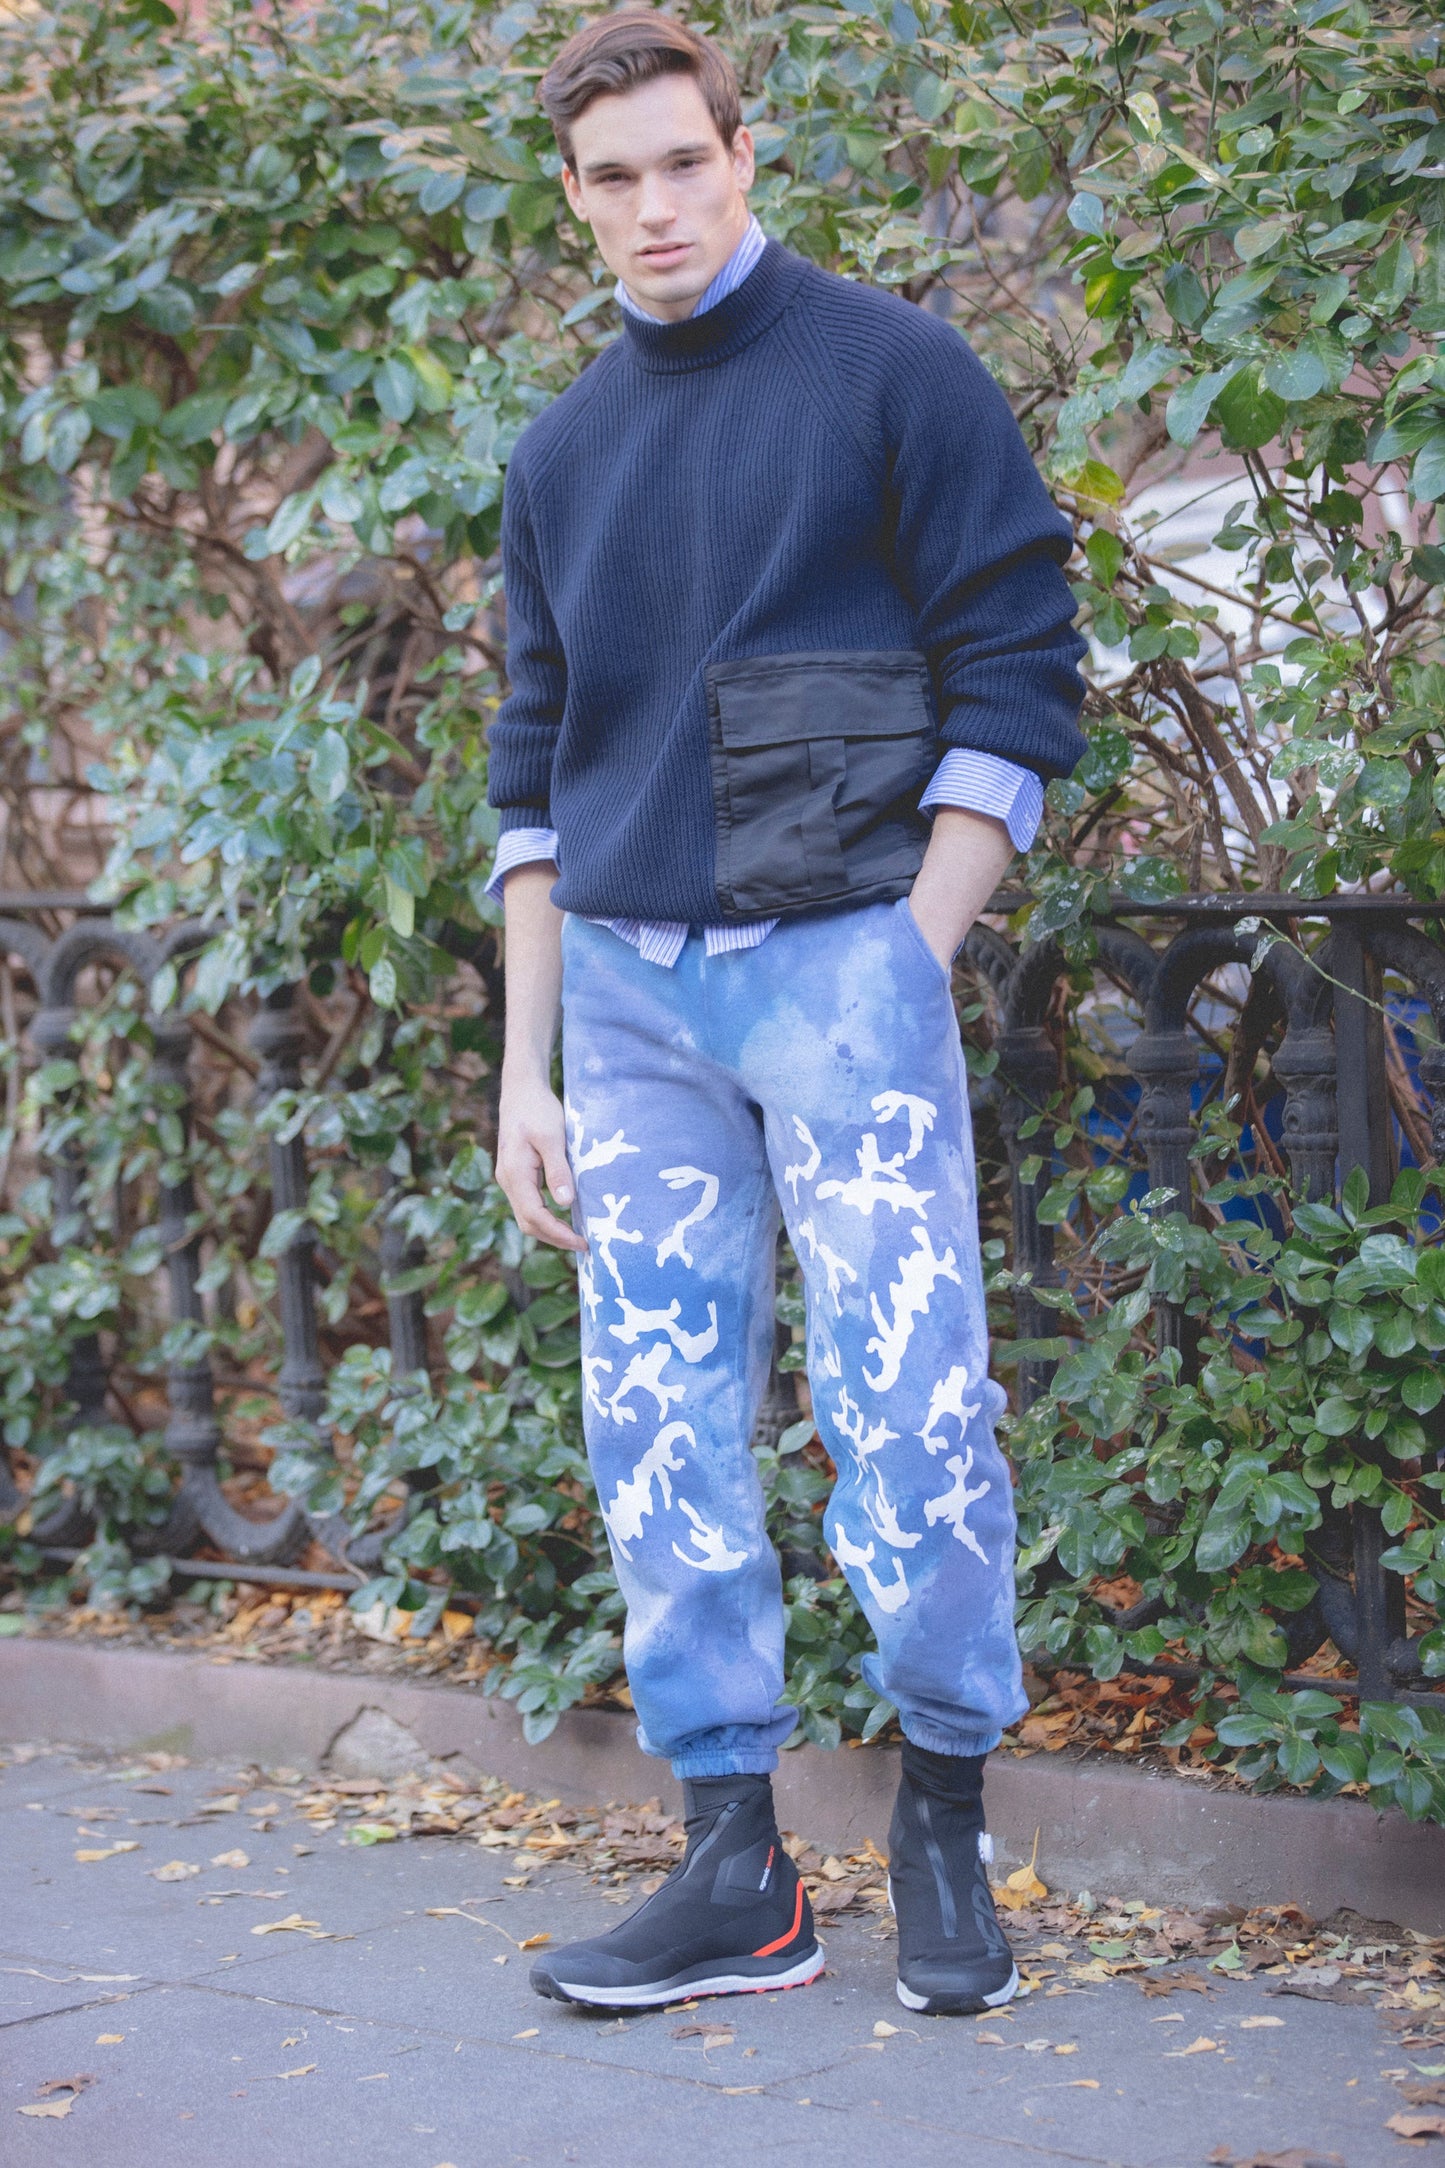 Mason Mckenrick is layered up in the Nylon Patch Sweater over the Stripe button down and Avon Sweatpant.